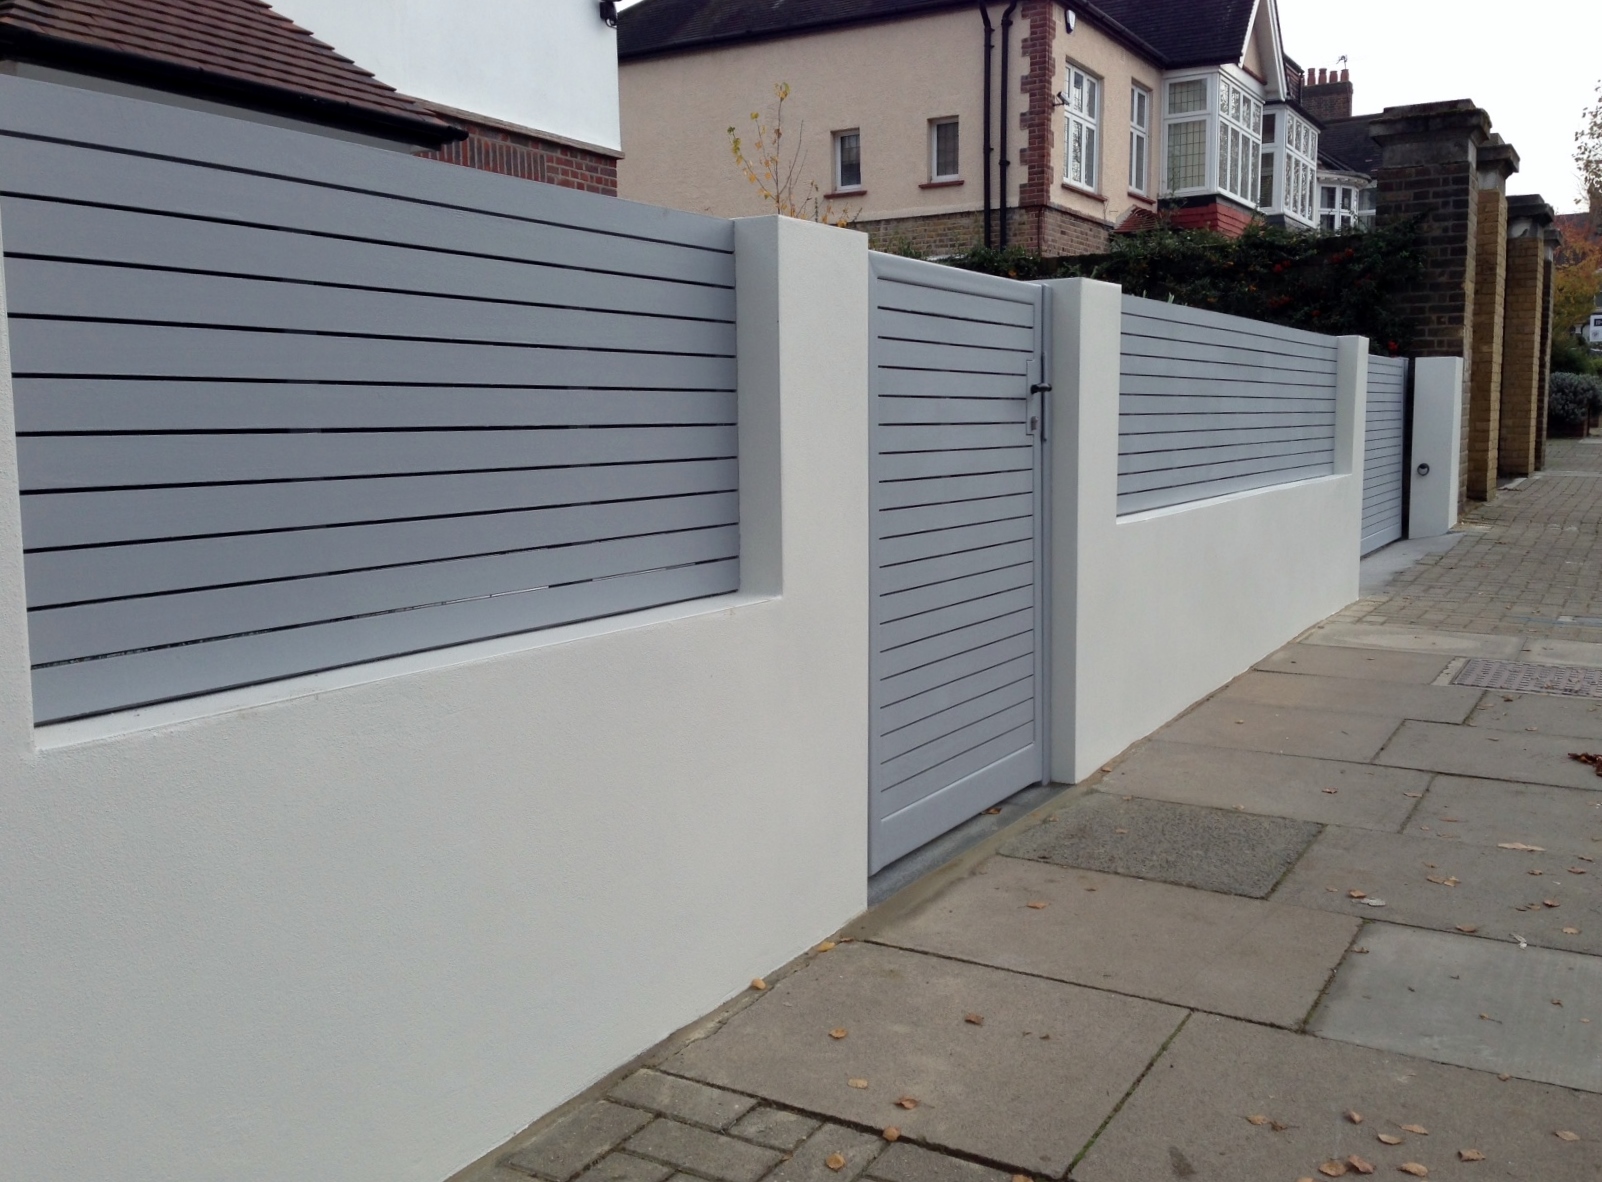 front boundary wall screen automated electronic gate installation grey wooden fence bike store modern garden design balham clapham london (3)